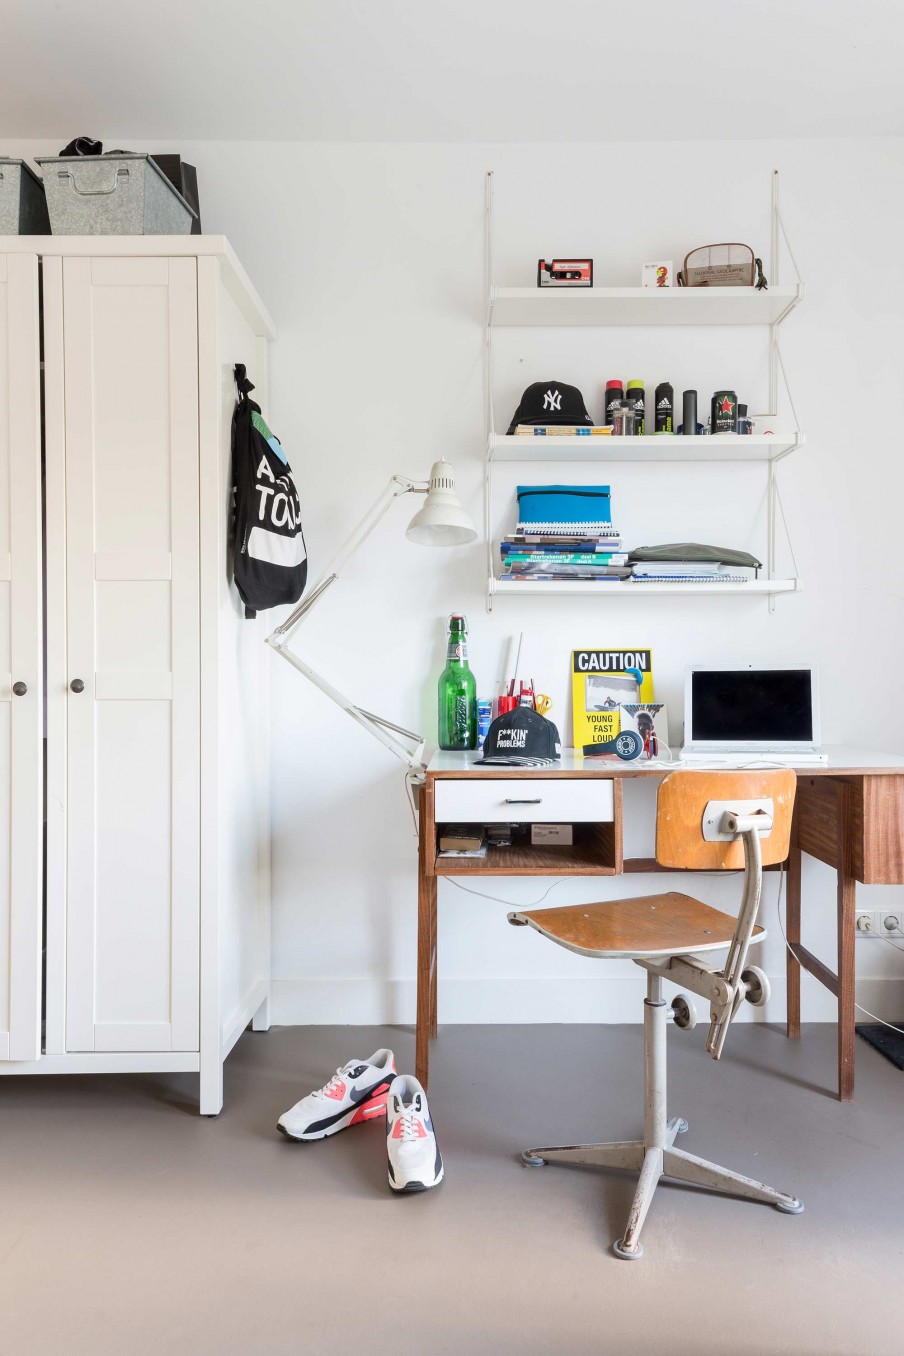 09 The home office corner is mid-century modern with shabby furniture